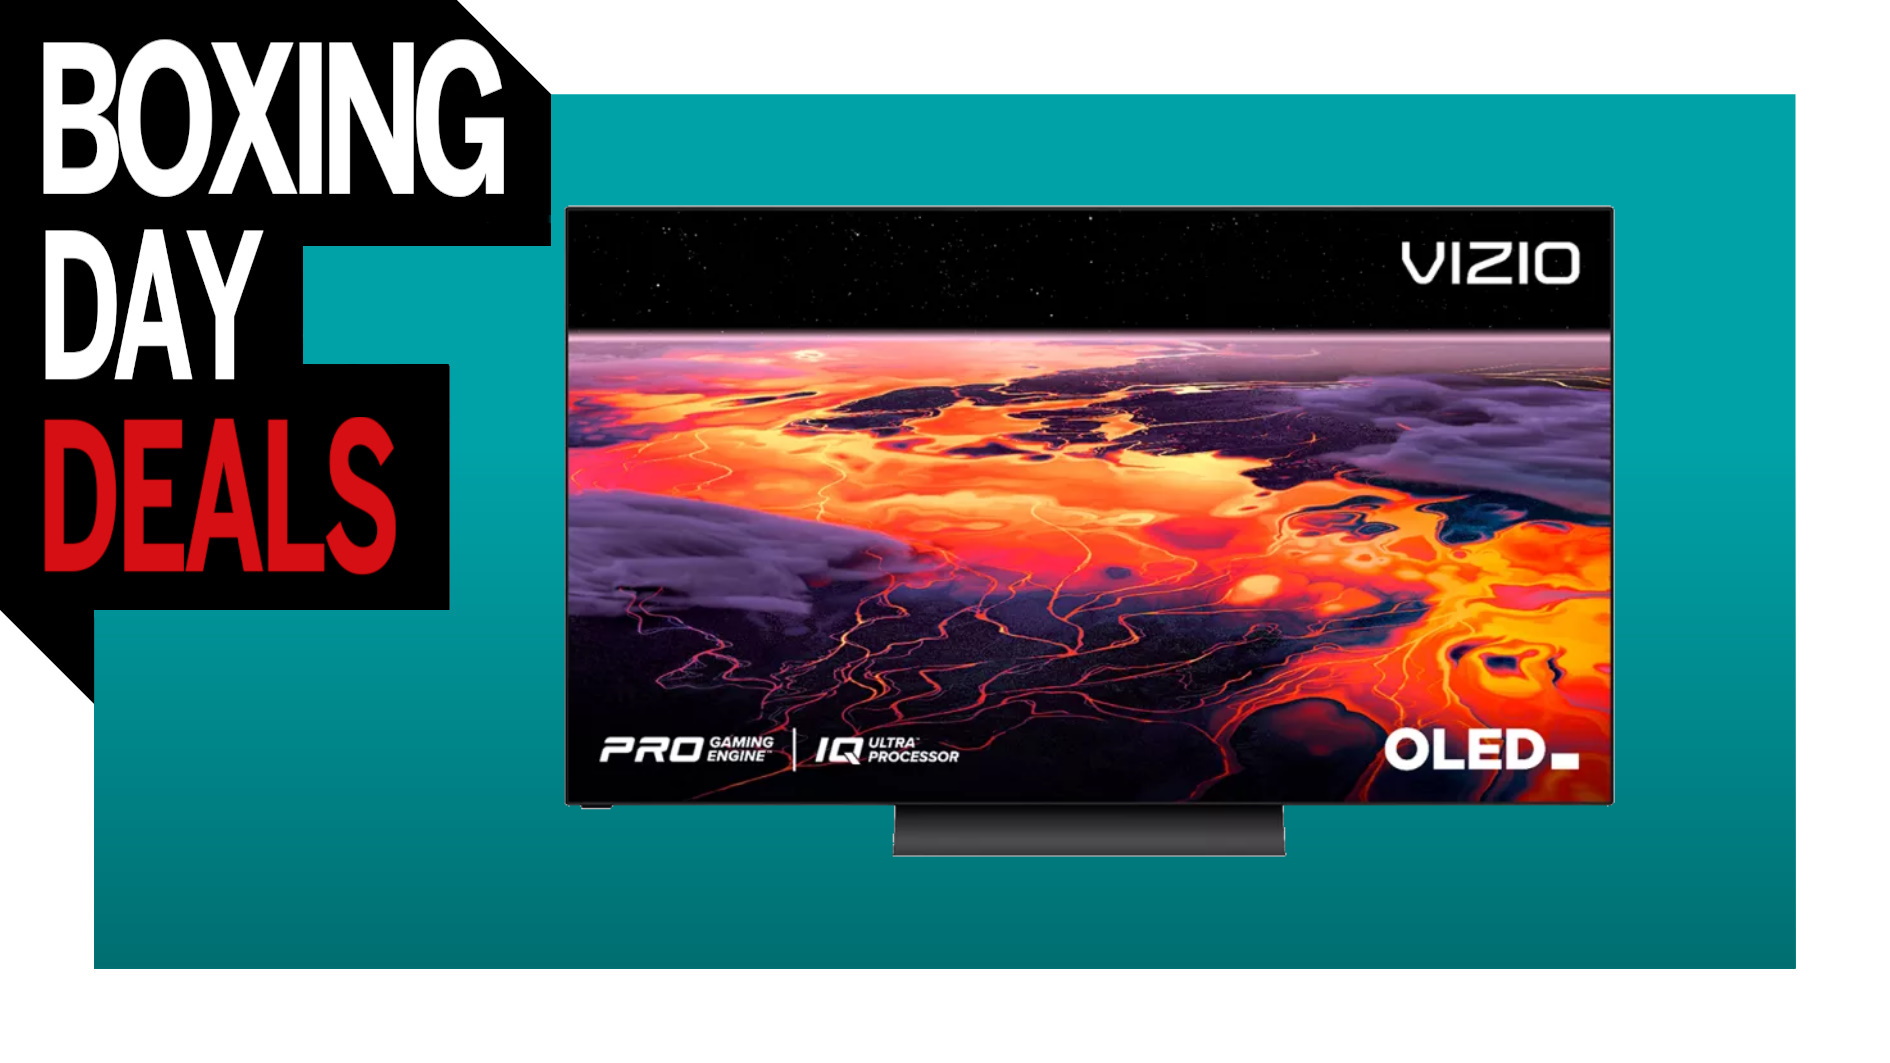  Cover up that ugly wall with this 65-inch 120Hz 4K OLED TV that's back on sale for $1499 